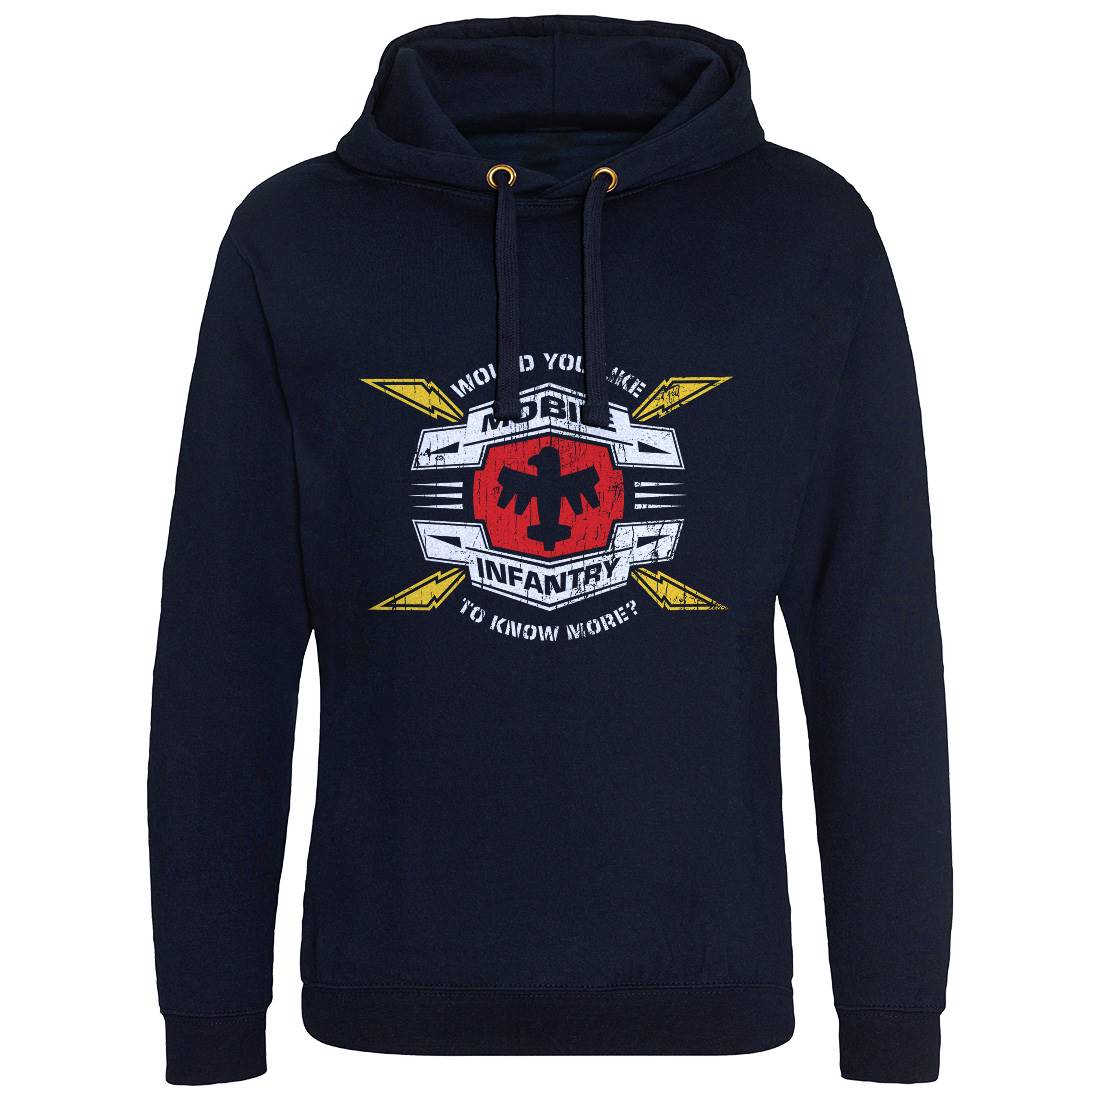 Mobile Infantry Mens Hoodie Without Pocket Army D270